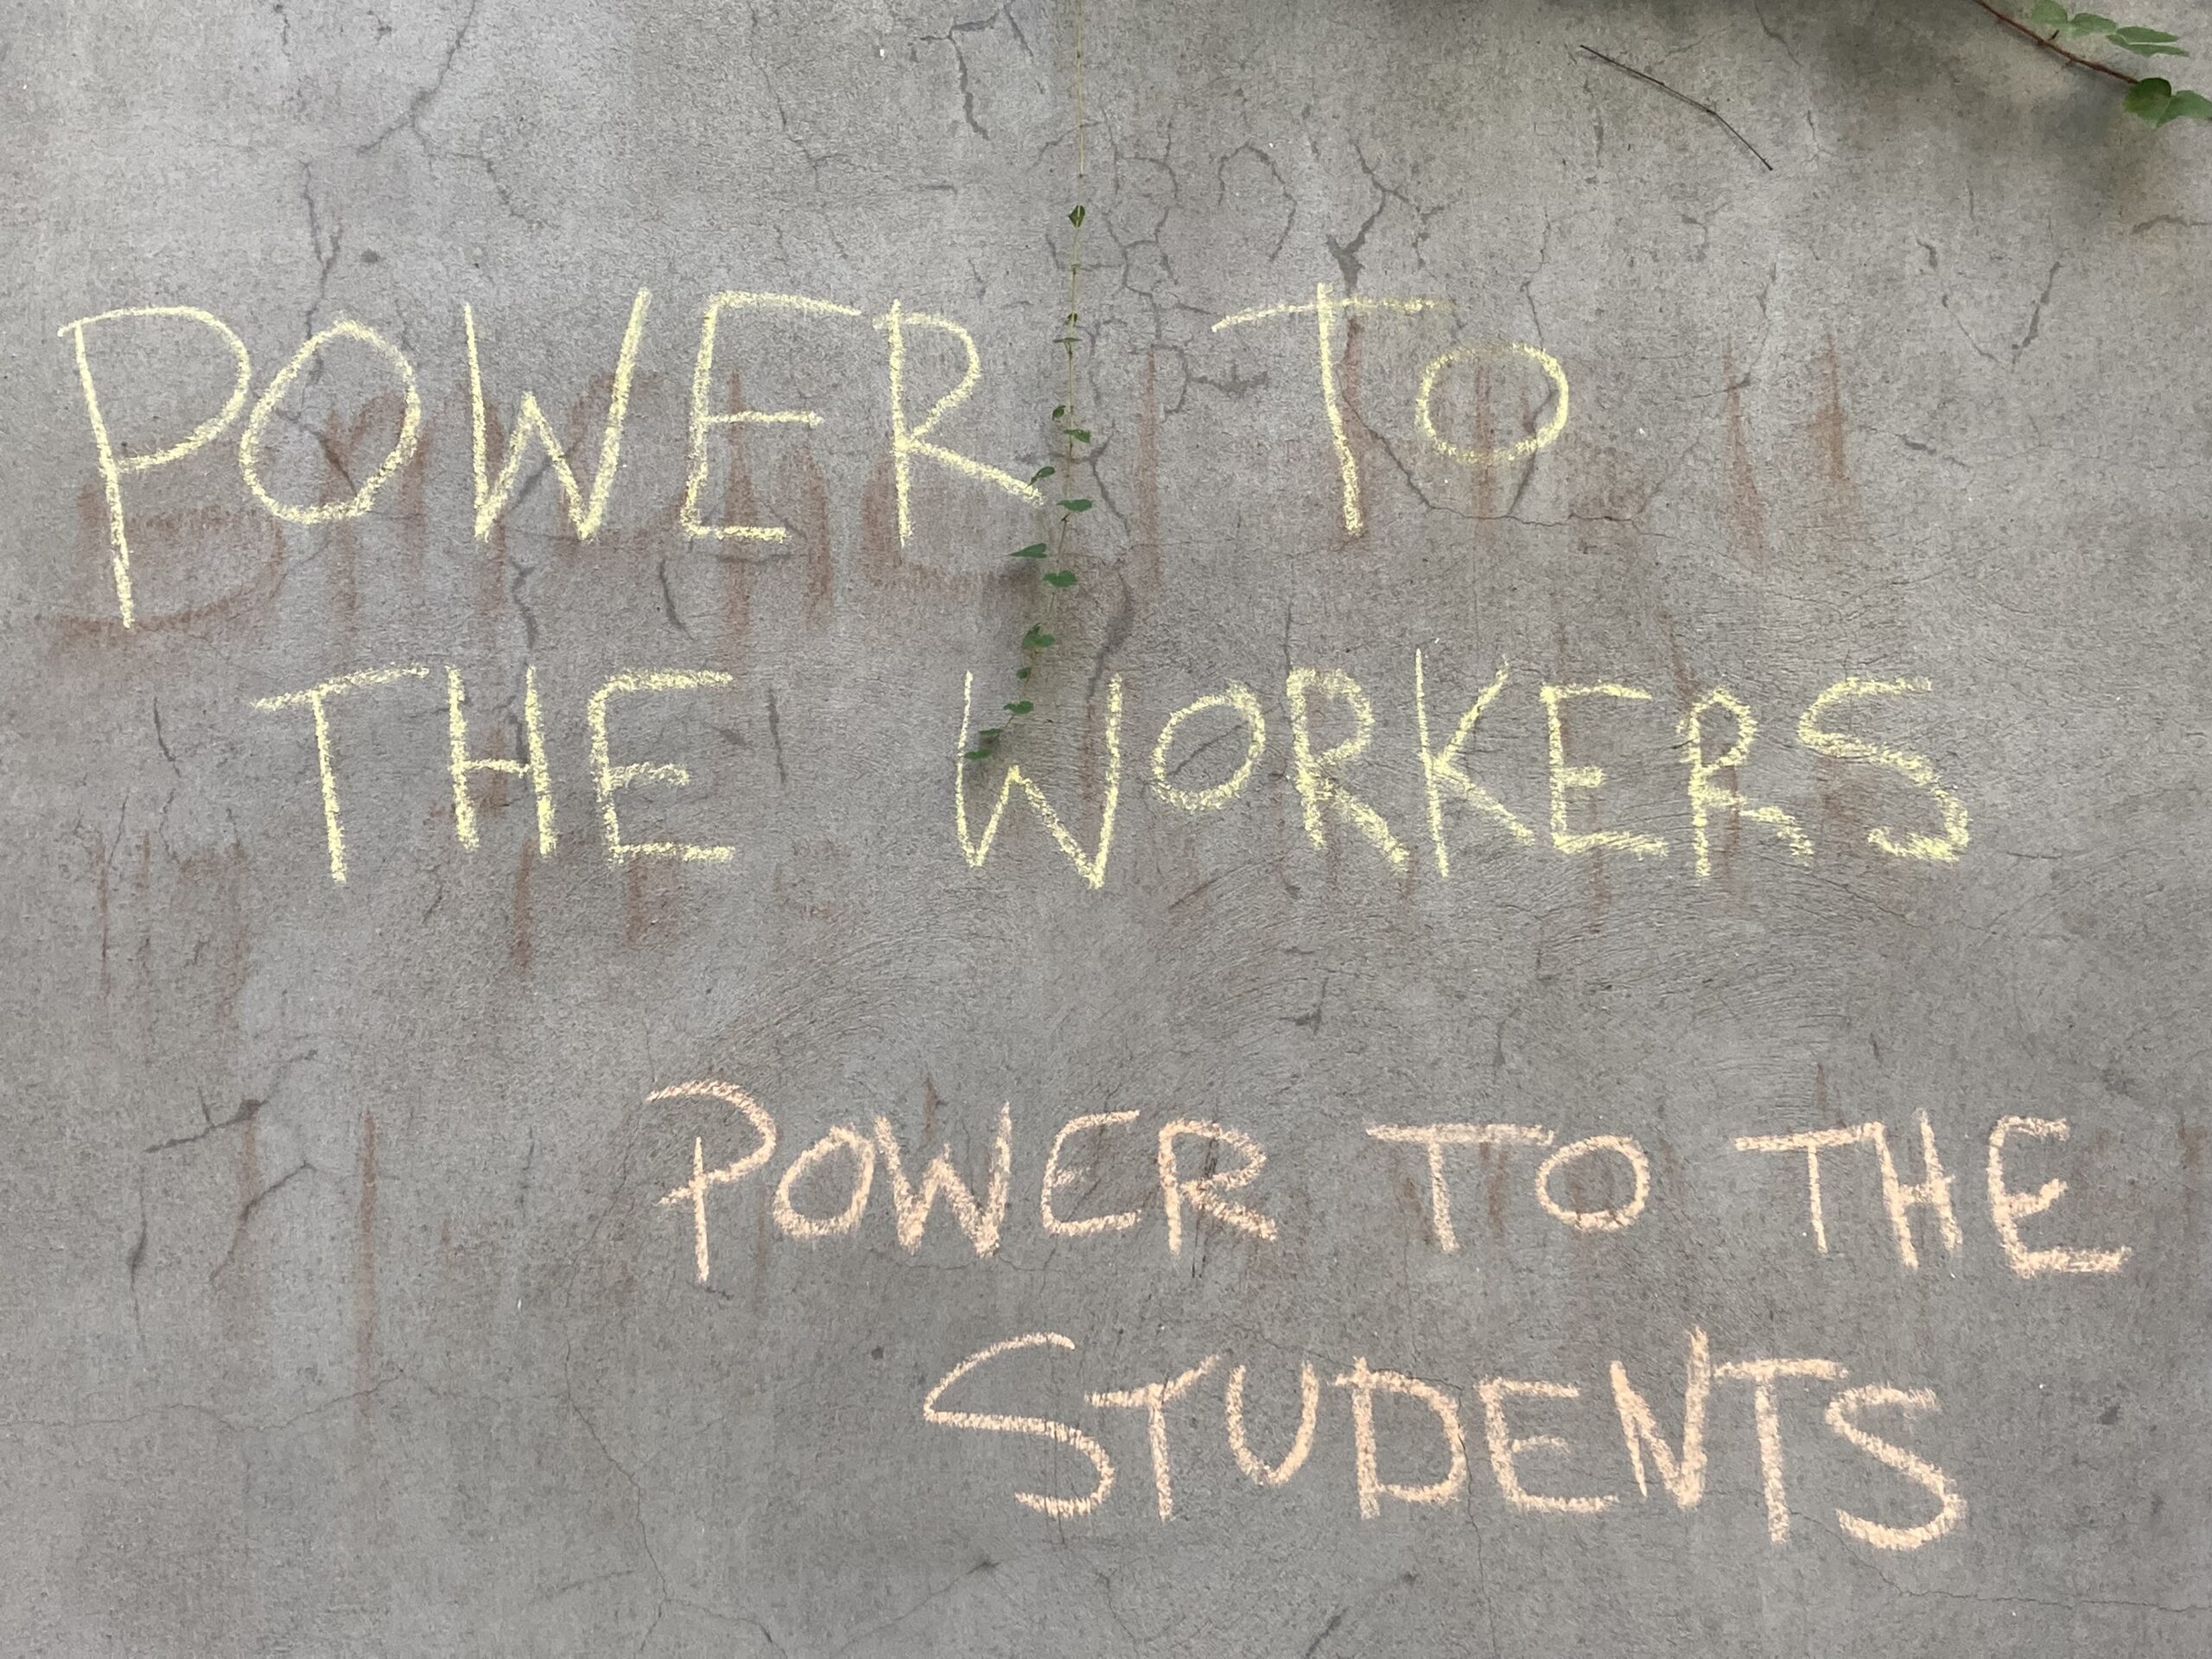 A gray wall with cracks in it has writing in chalk in all capital letters. In yellow chalk, it reads “POWER TO THE WORKERS”. Below that, in orange chalk, it reads“POWER TO THE STUDENTS”. A string of green leaves is coming down from the top of the wall and rests over the word “WORKERS.”